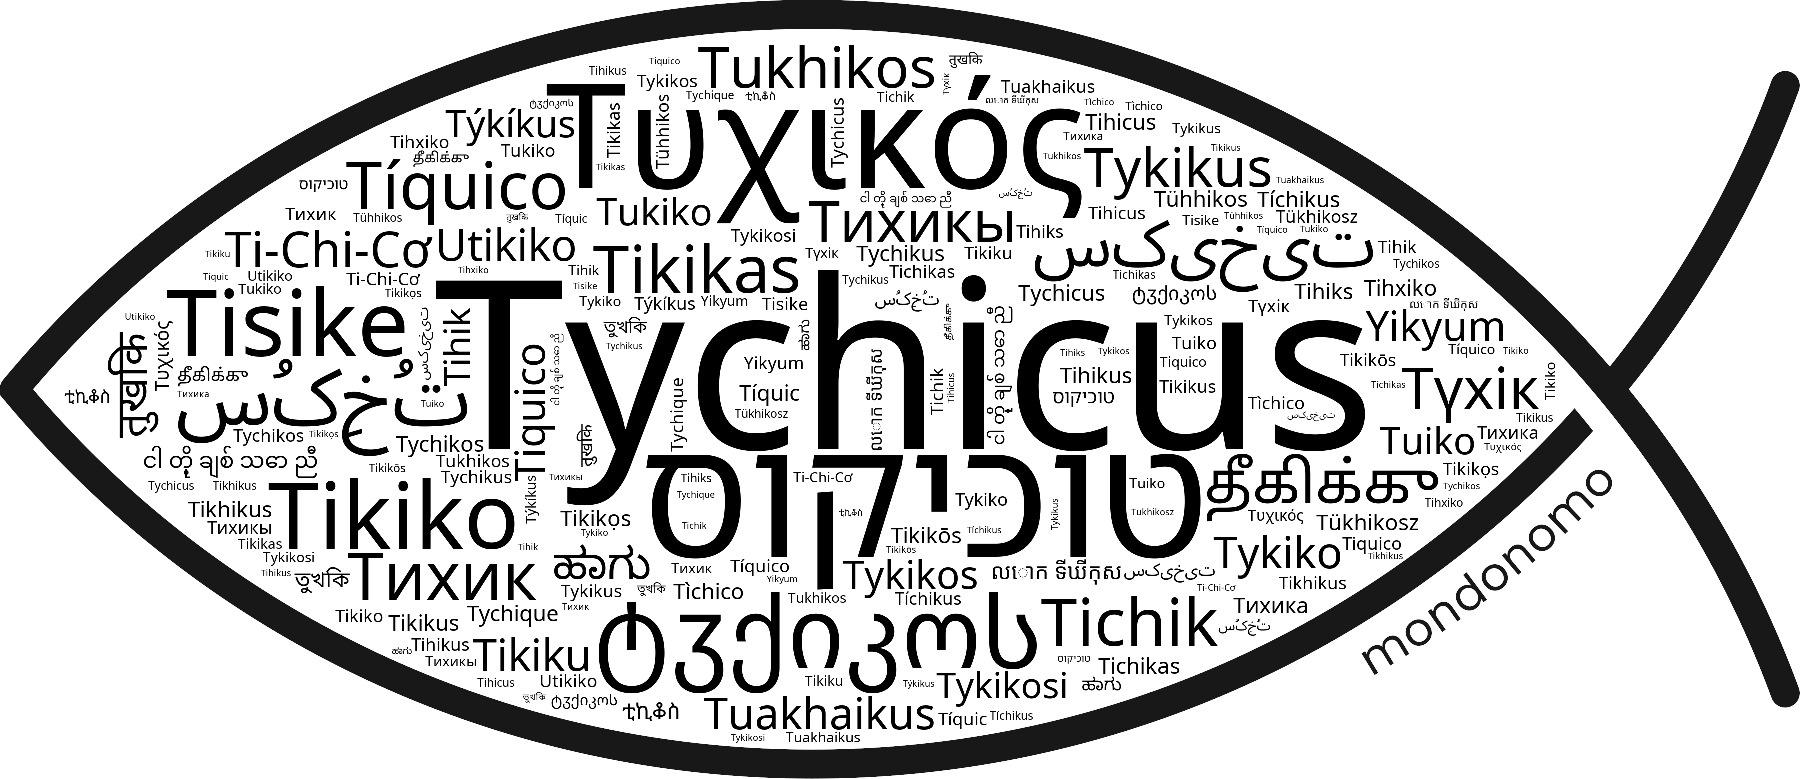 Name Tychicus in the world's Bibles